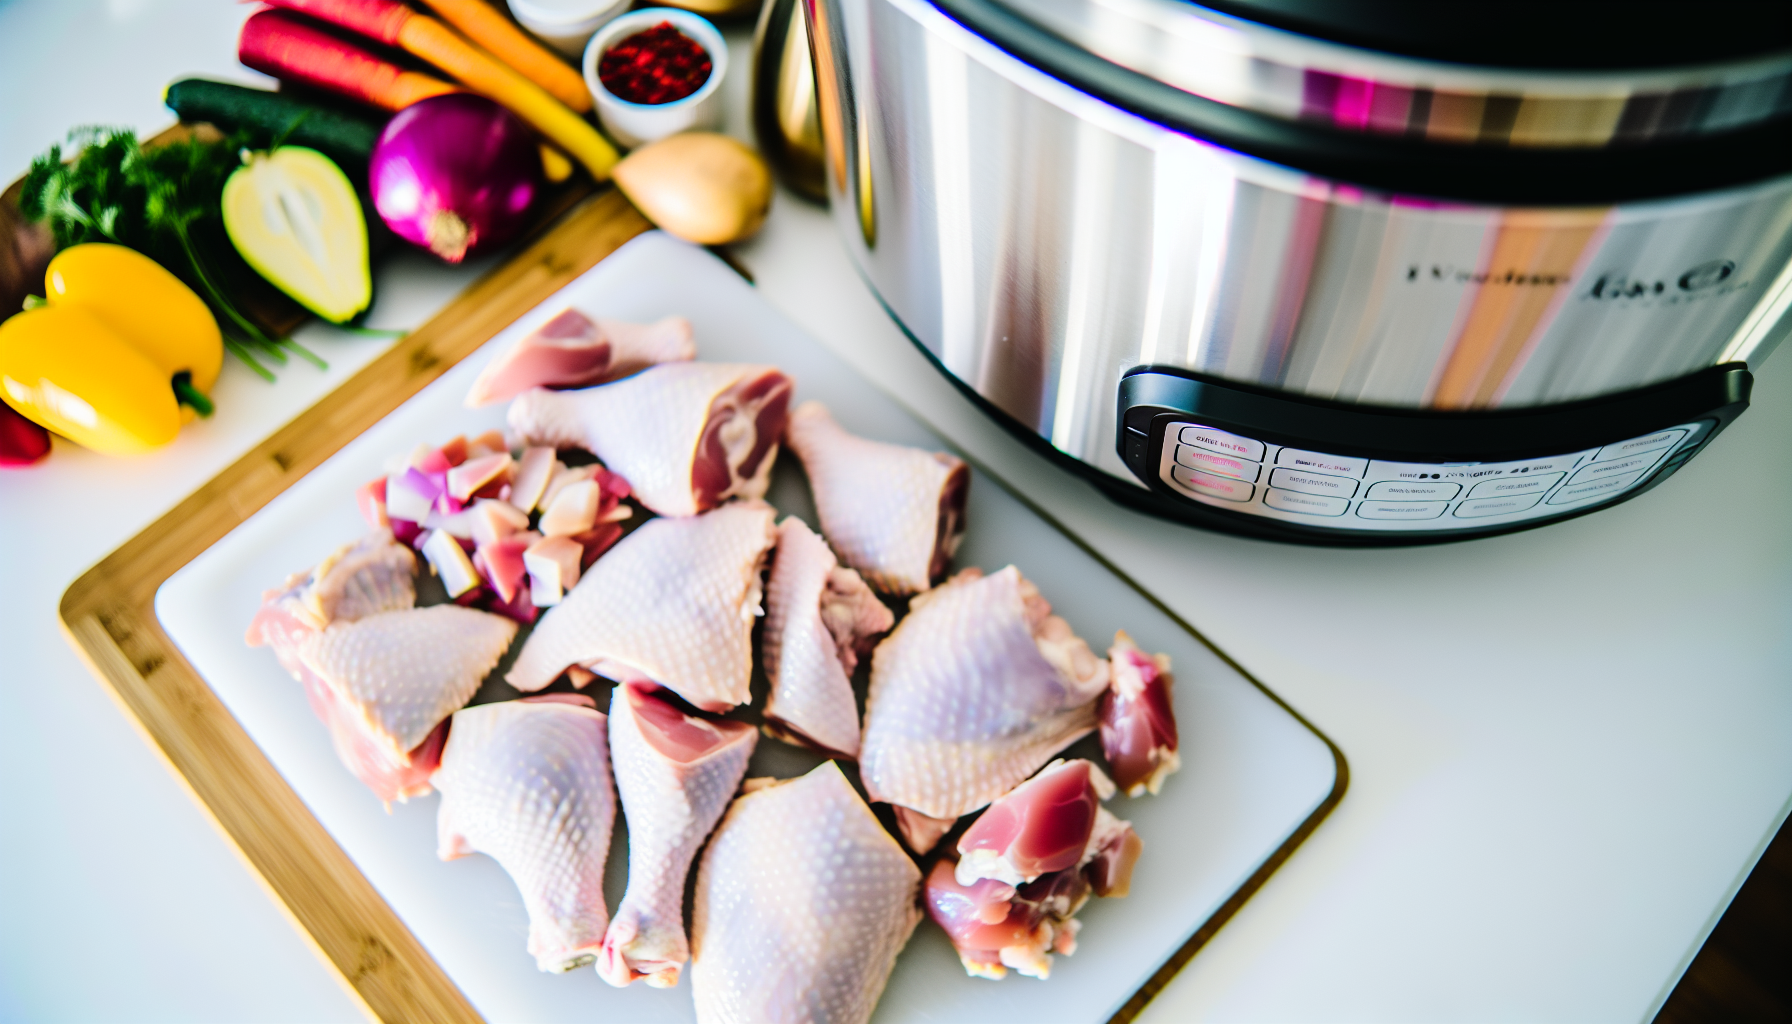 Preparation of alternative cuts of chicken for cooking in the Instant Pot